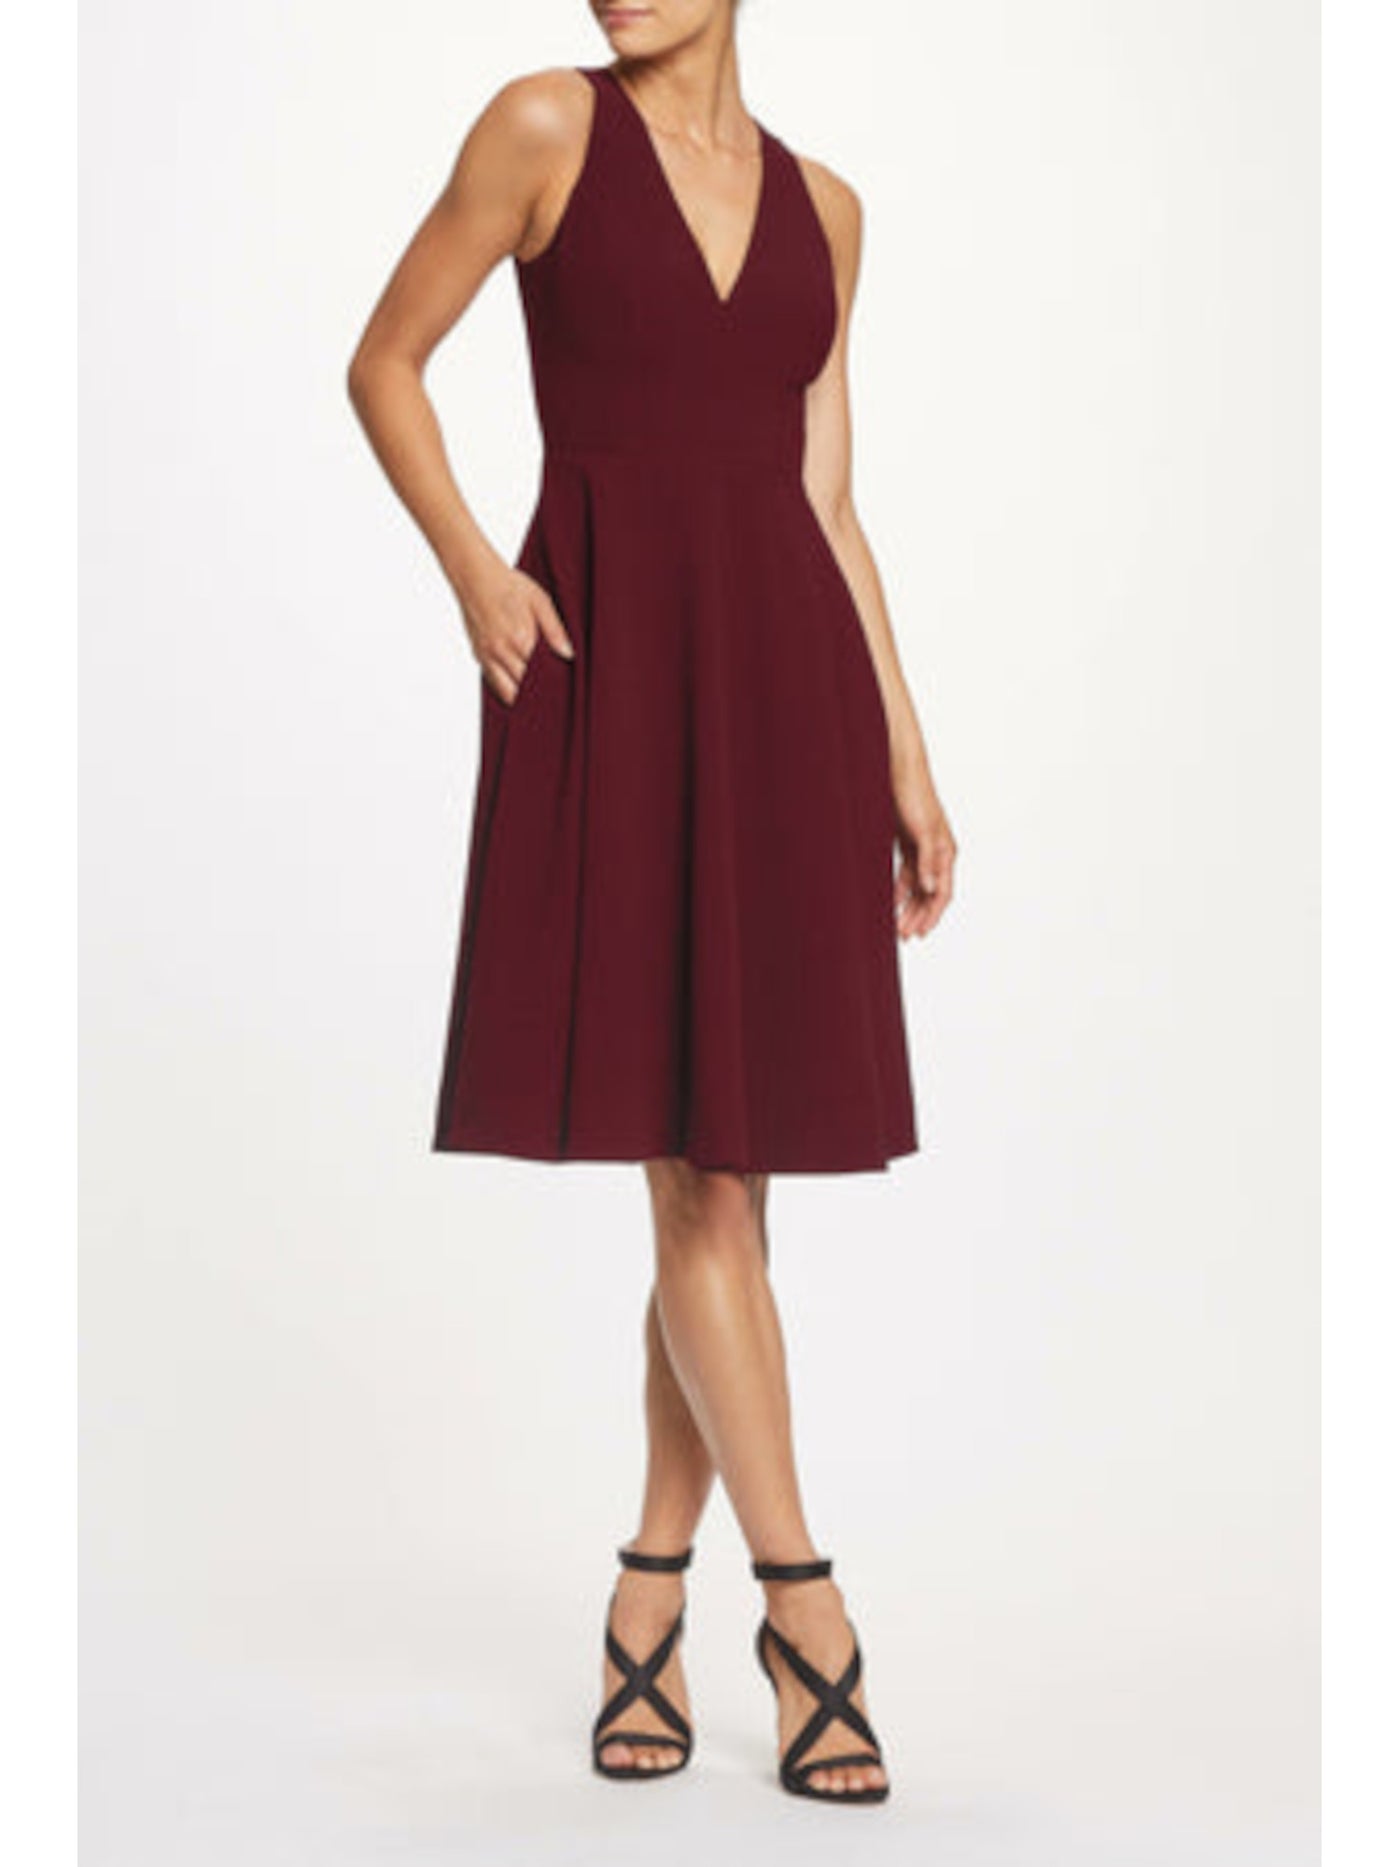 DRESS THE POPULATION Womens Burgundy Zippered Pocketed Textured Lined Sleeveless V Neck Below The Knee Party Fit + Flare Dress XL